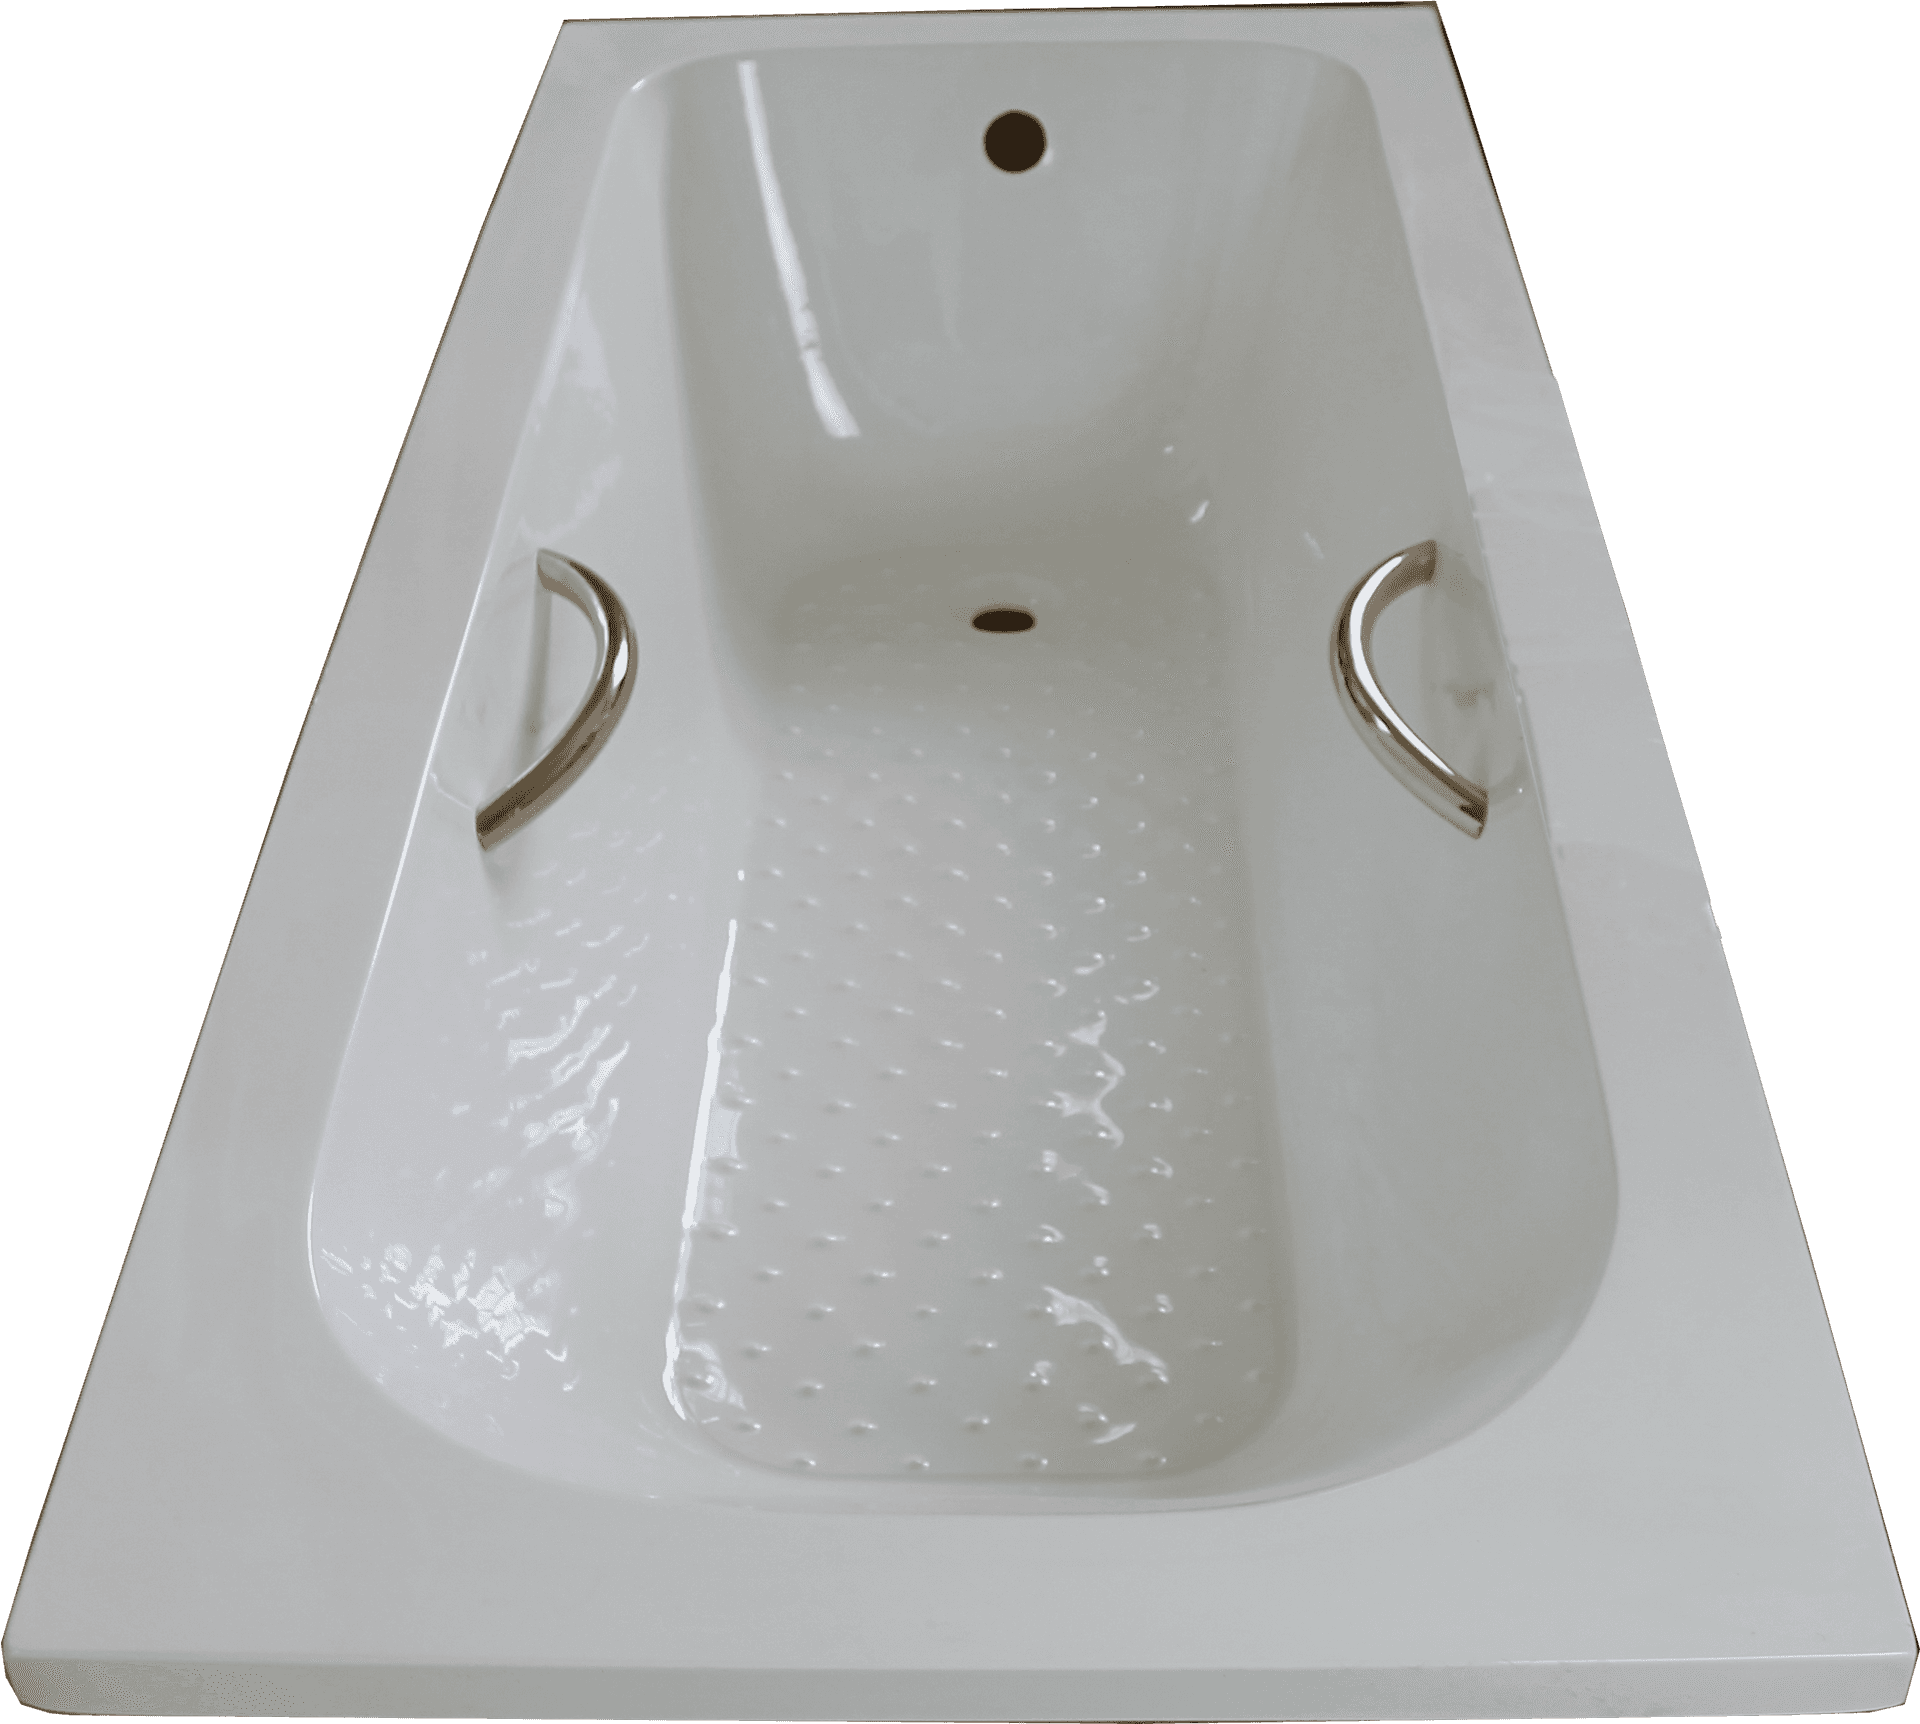 White Ceramic Bathroom Sink With Handles PNG image